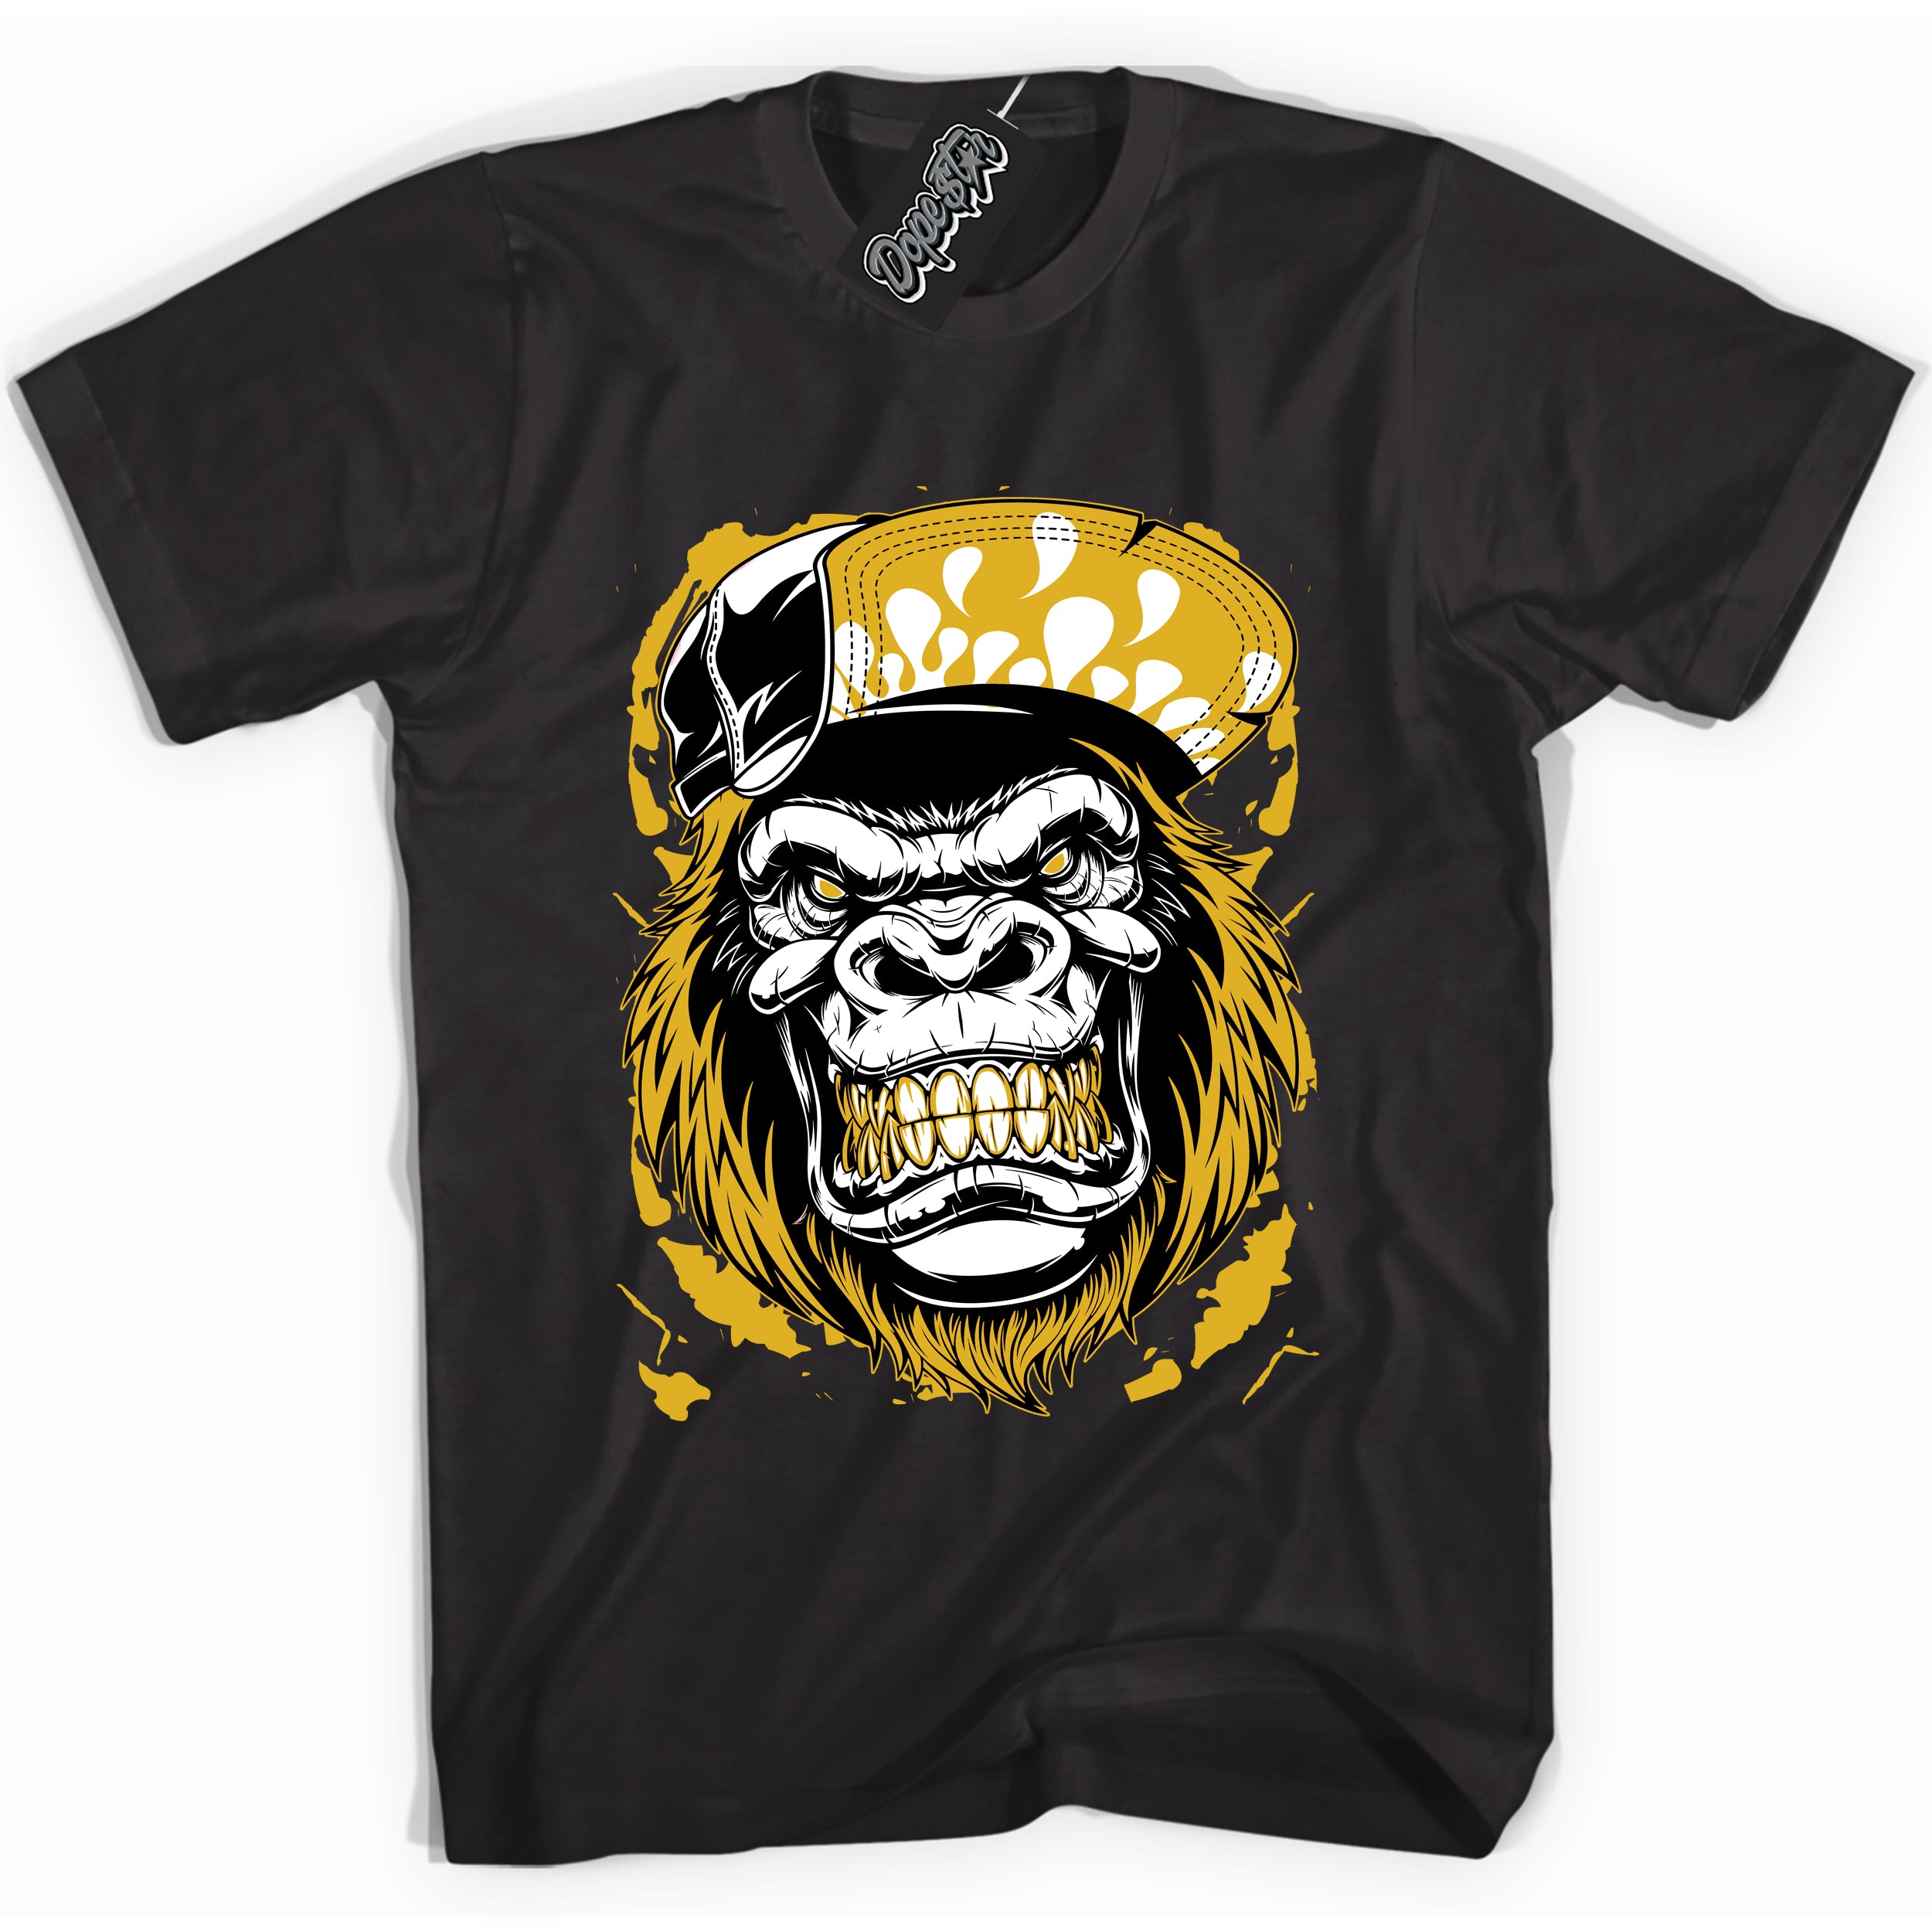 Cool Black Shirt with “ Gorilla Beast” design that perfectly matches Yellow Ochre 6s Sneakers.